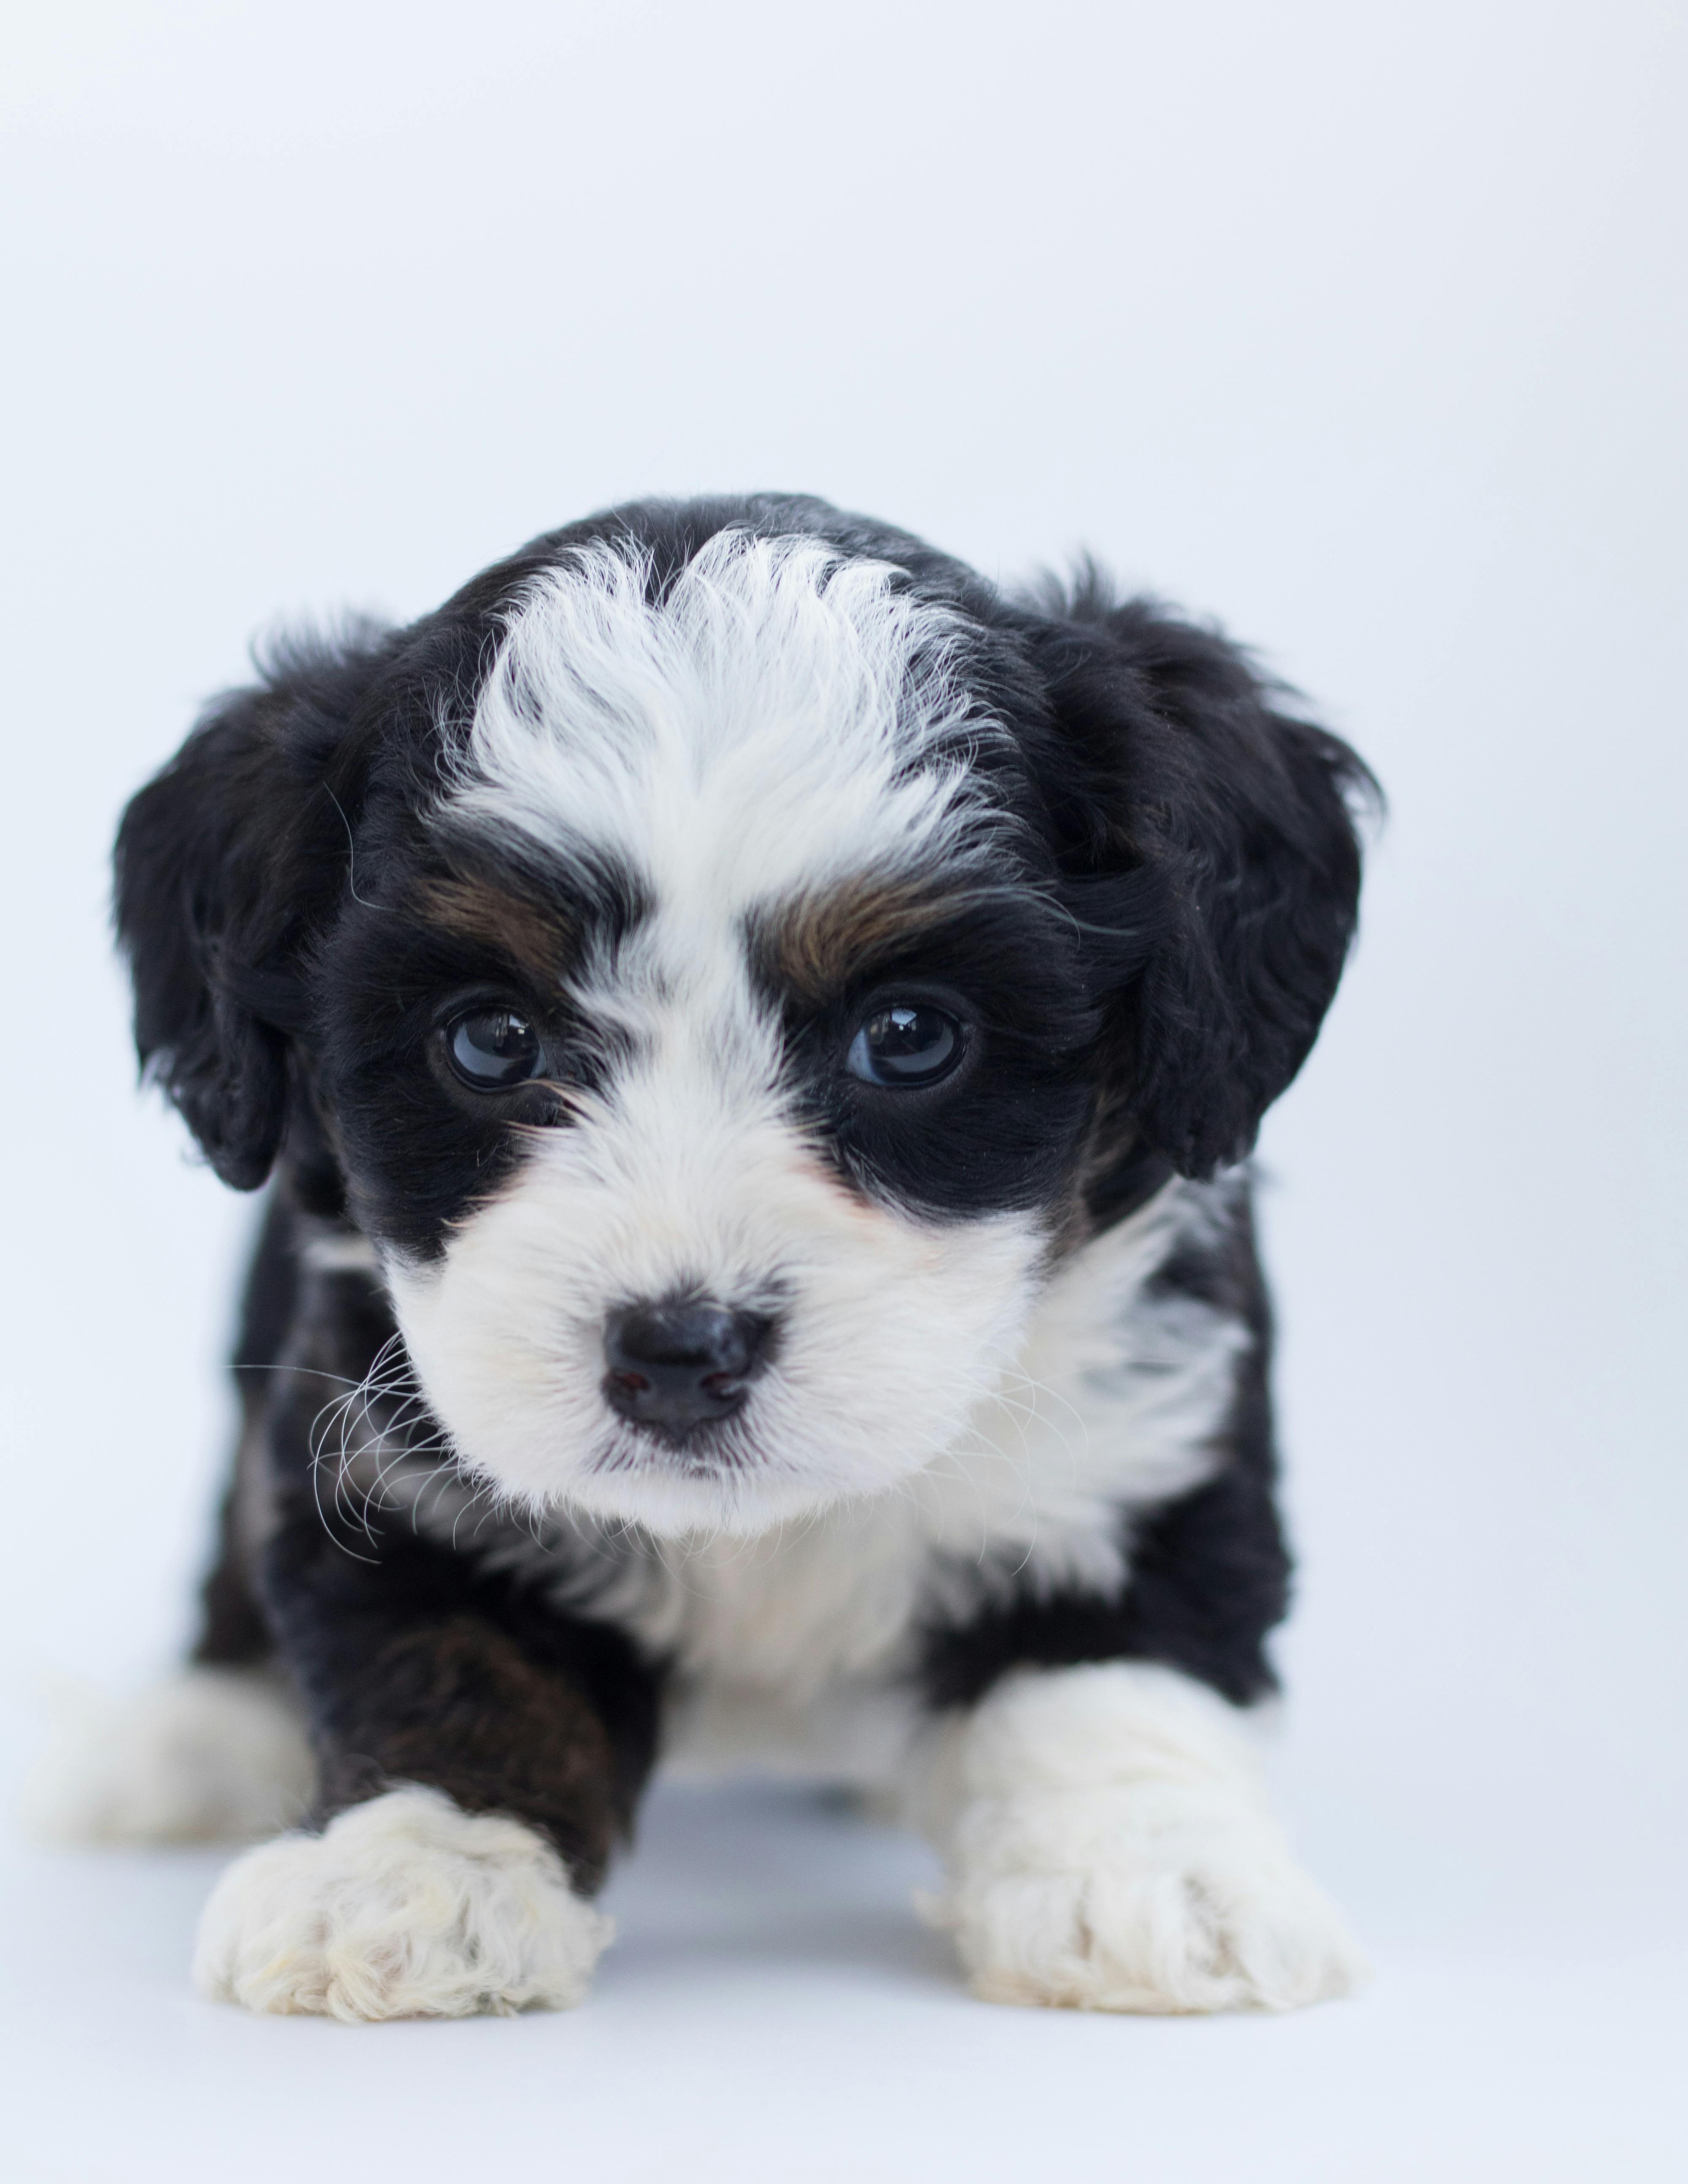 black and white puppy breeds